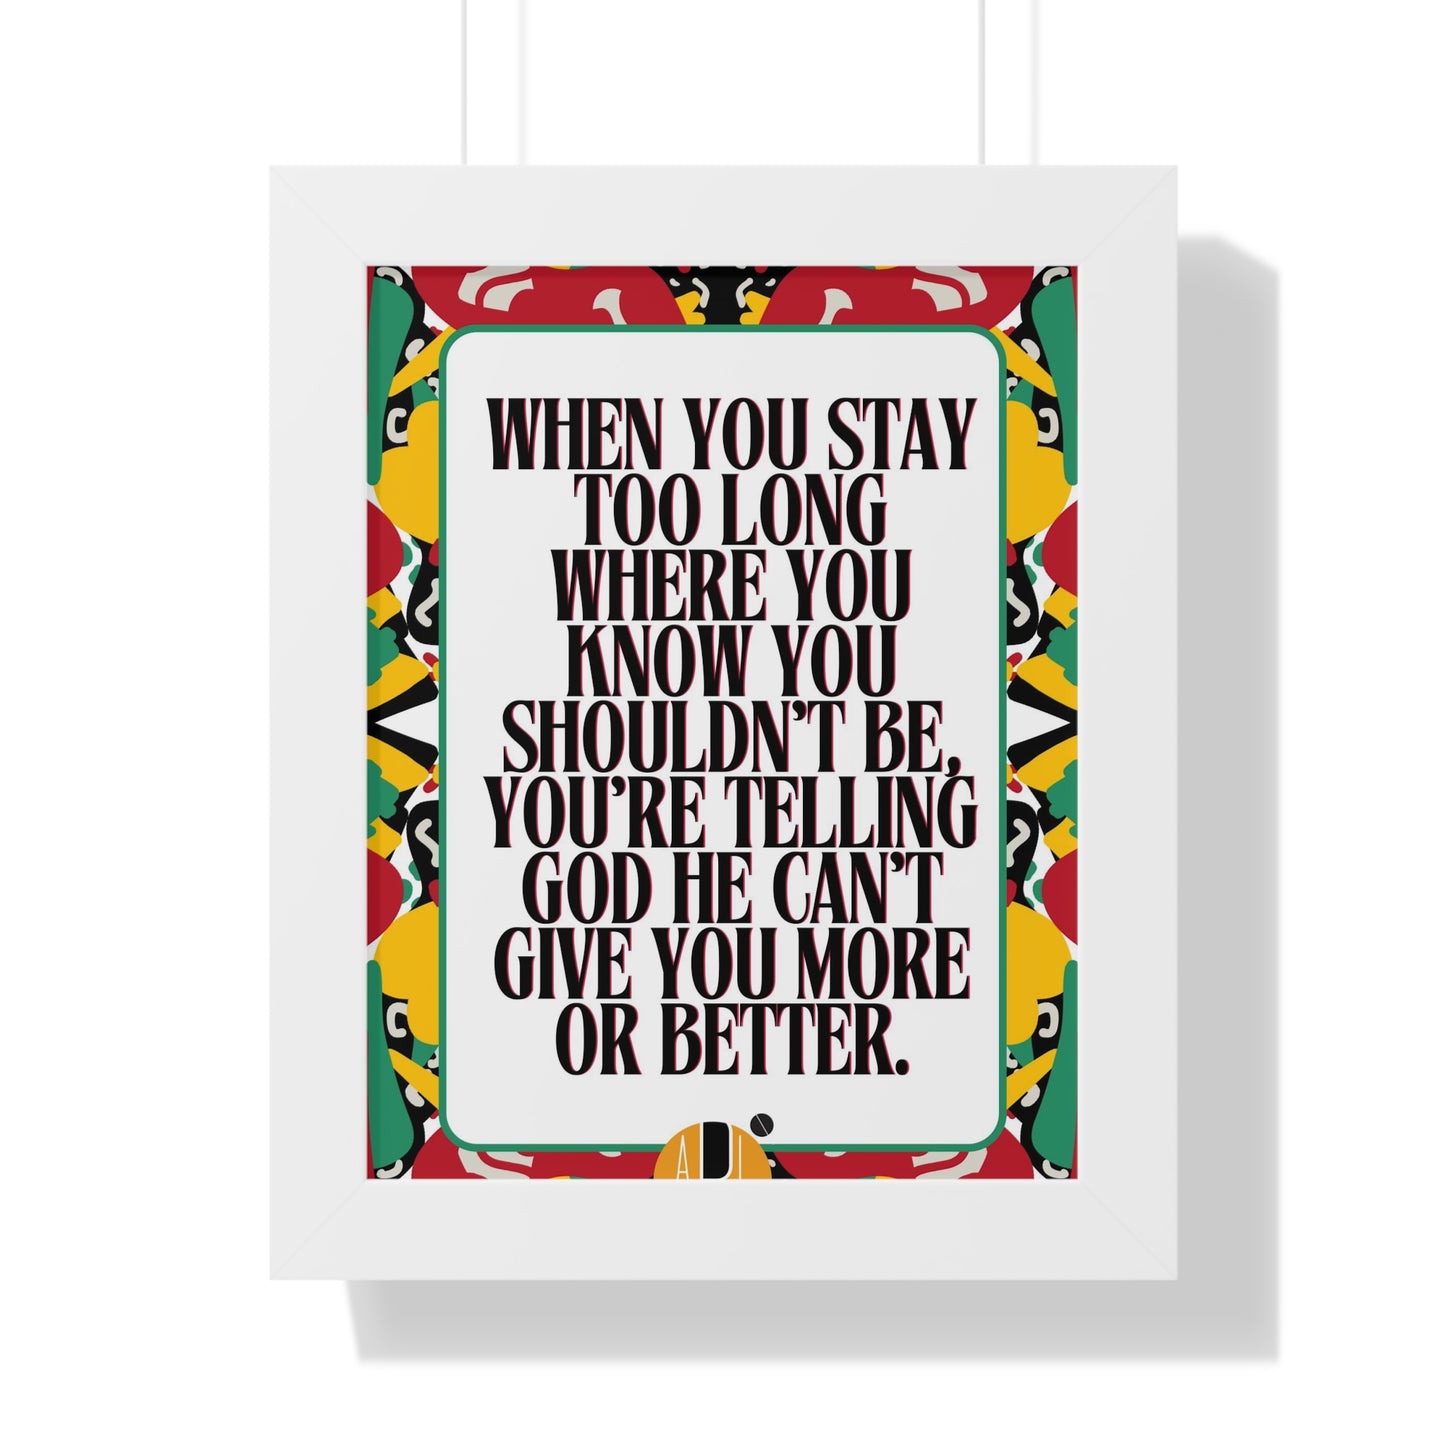 ABL Inspirational Framed Vertical Poster: " When you stay.."